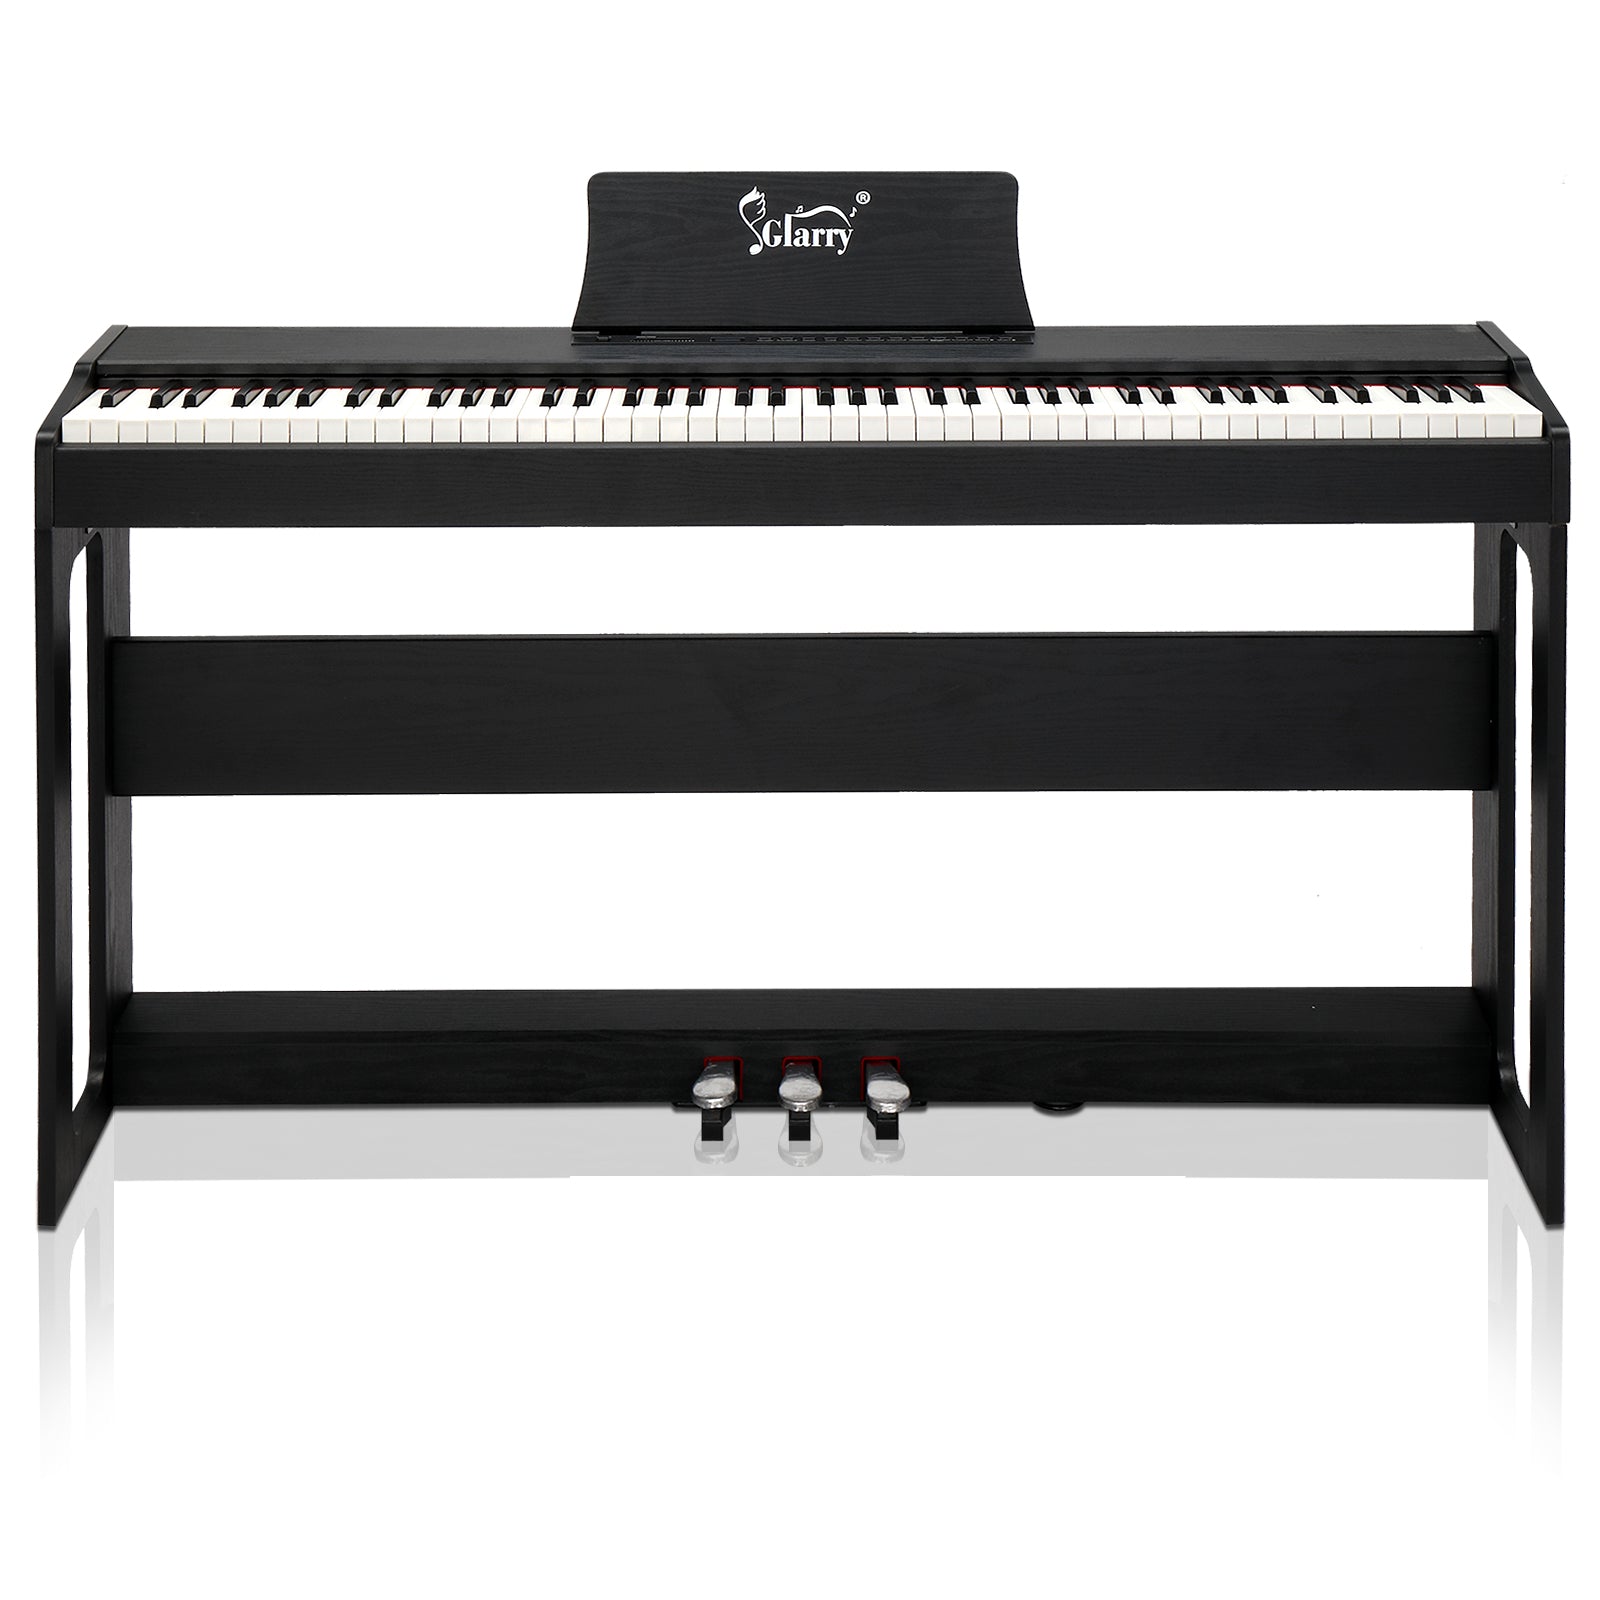 Glarry GDP-104 88 Keys Weighted Keyboards Digital Piano with Furniture Stand, Power Adapter, Triple Pedals, Headphones Black